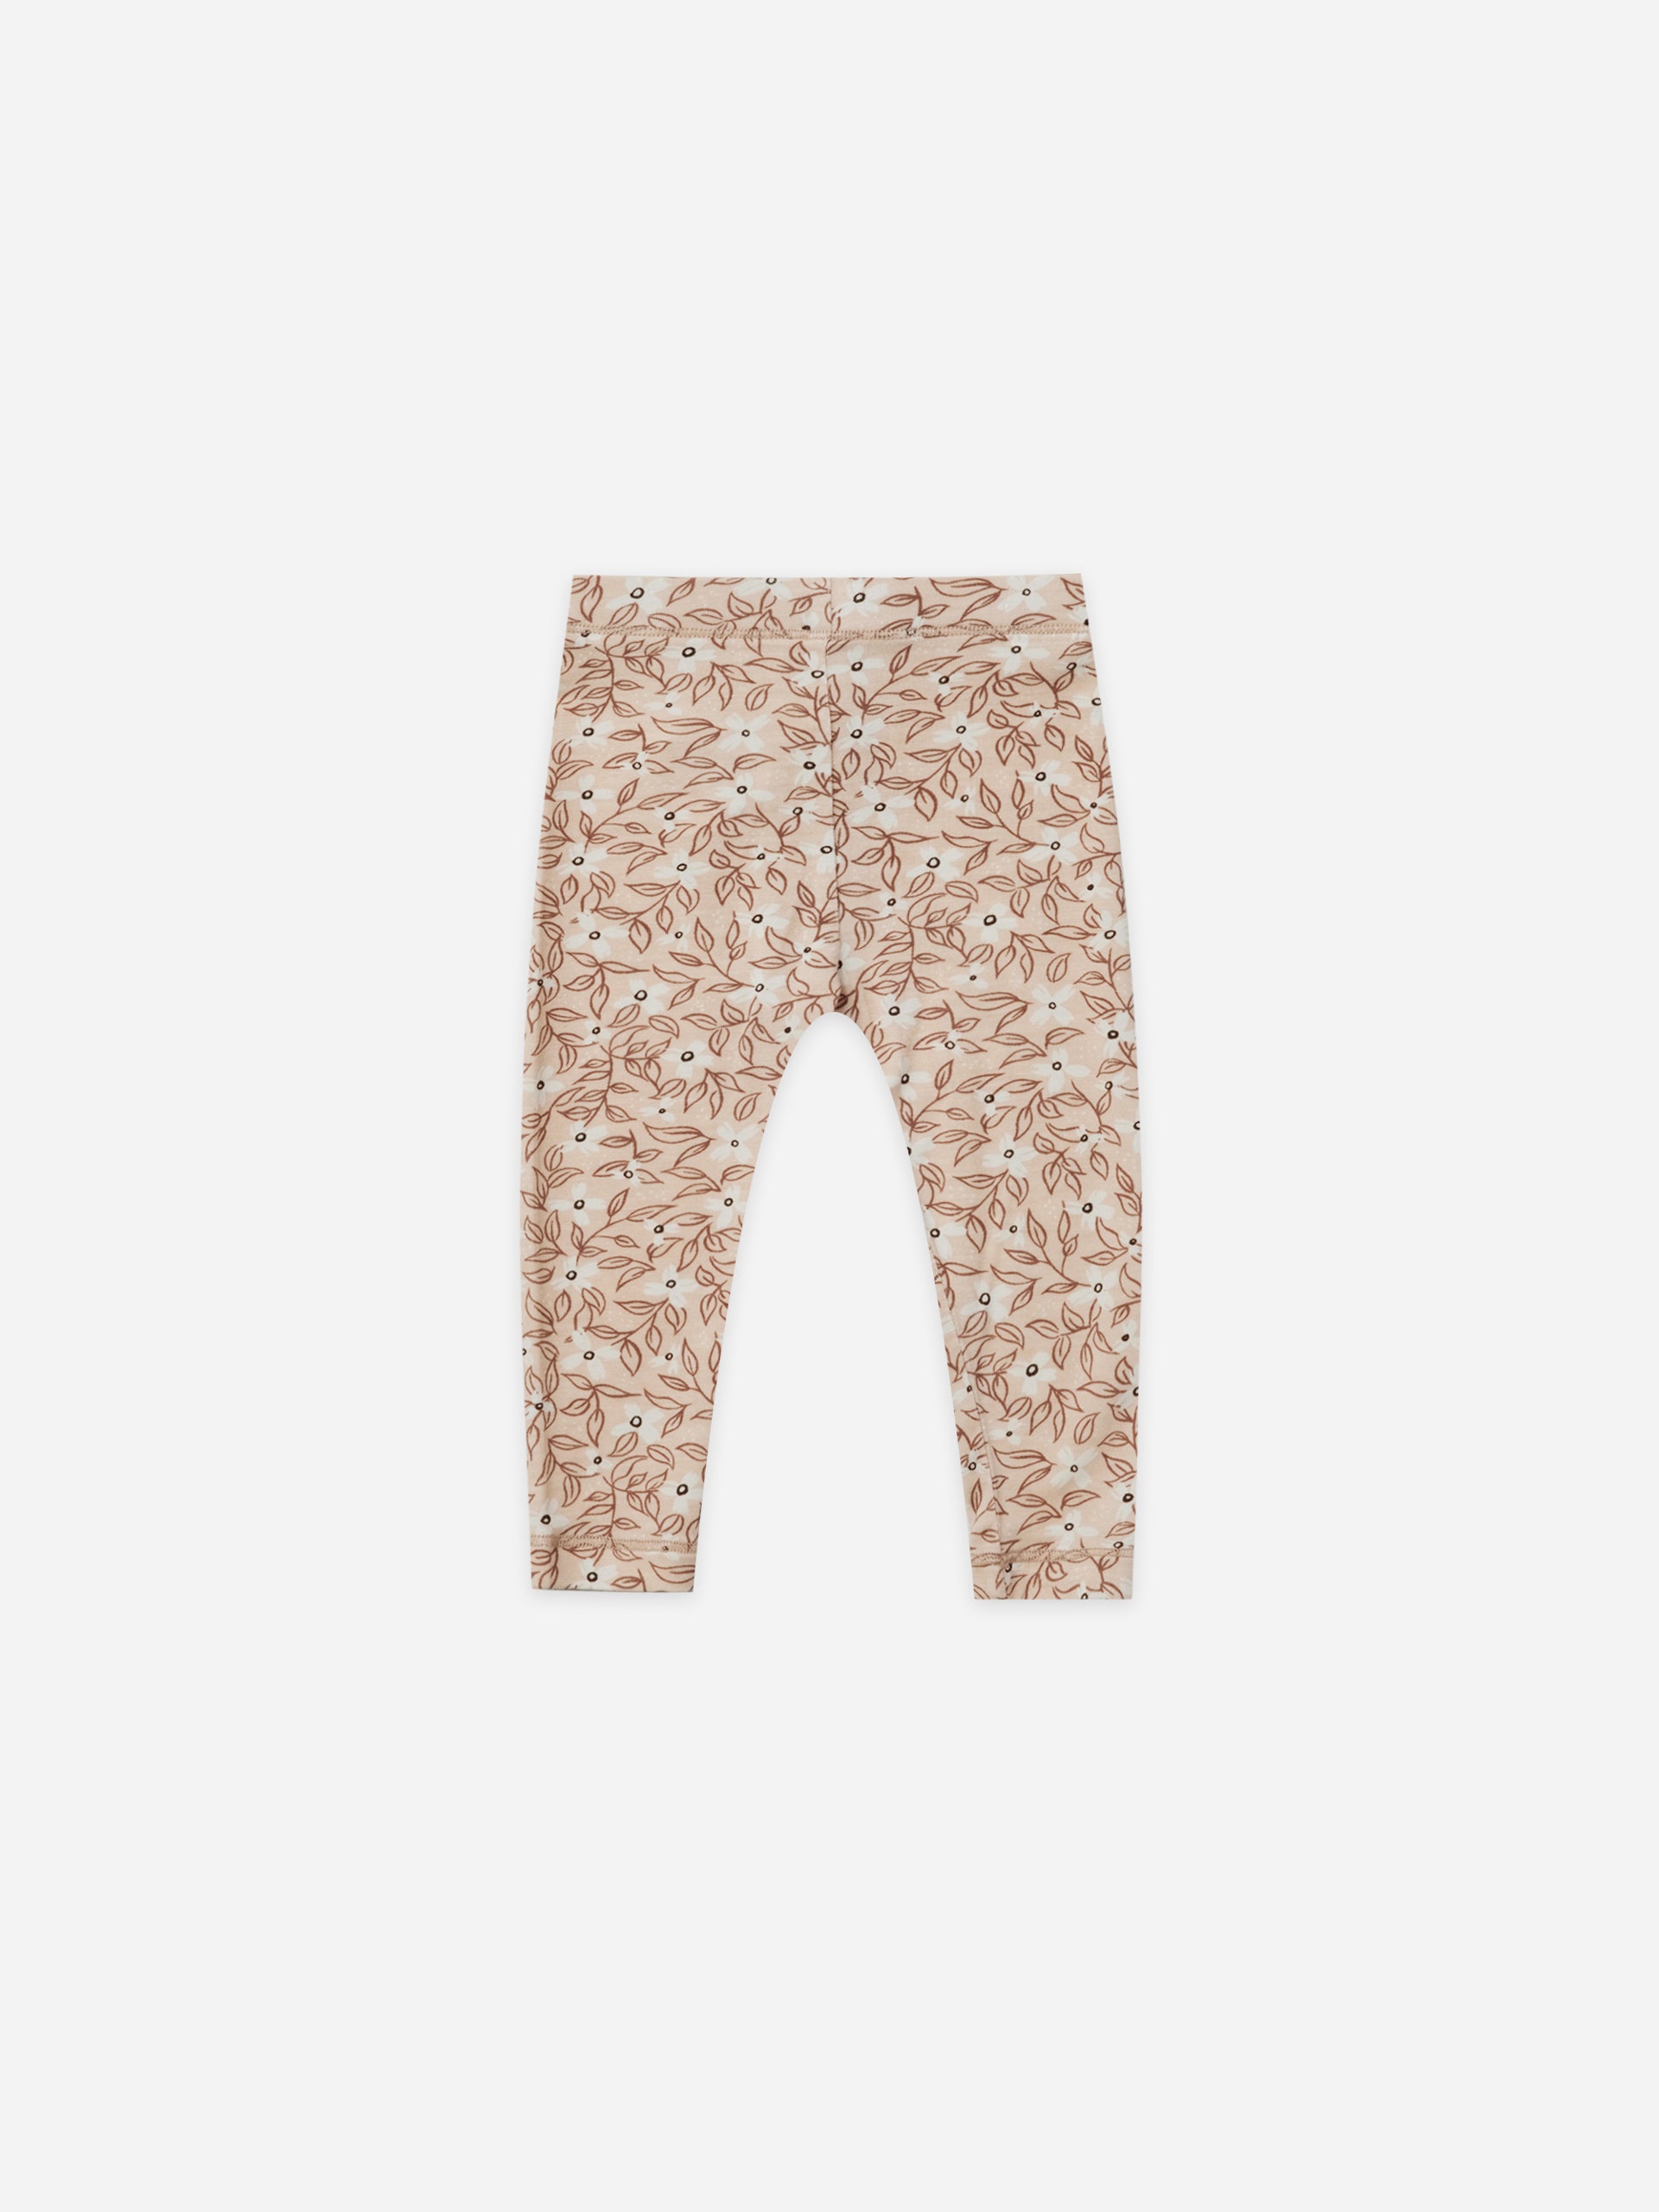 Quincy Mae Bamboo Legging in Blossom